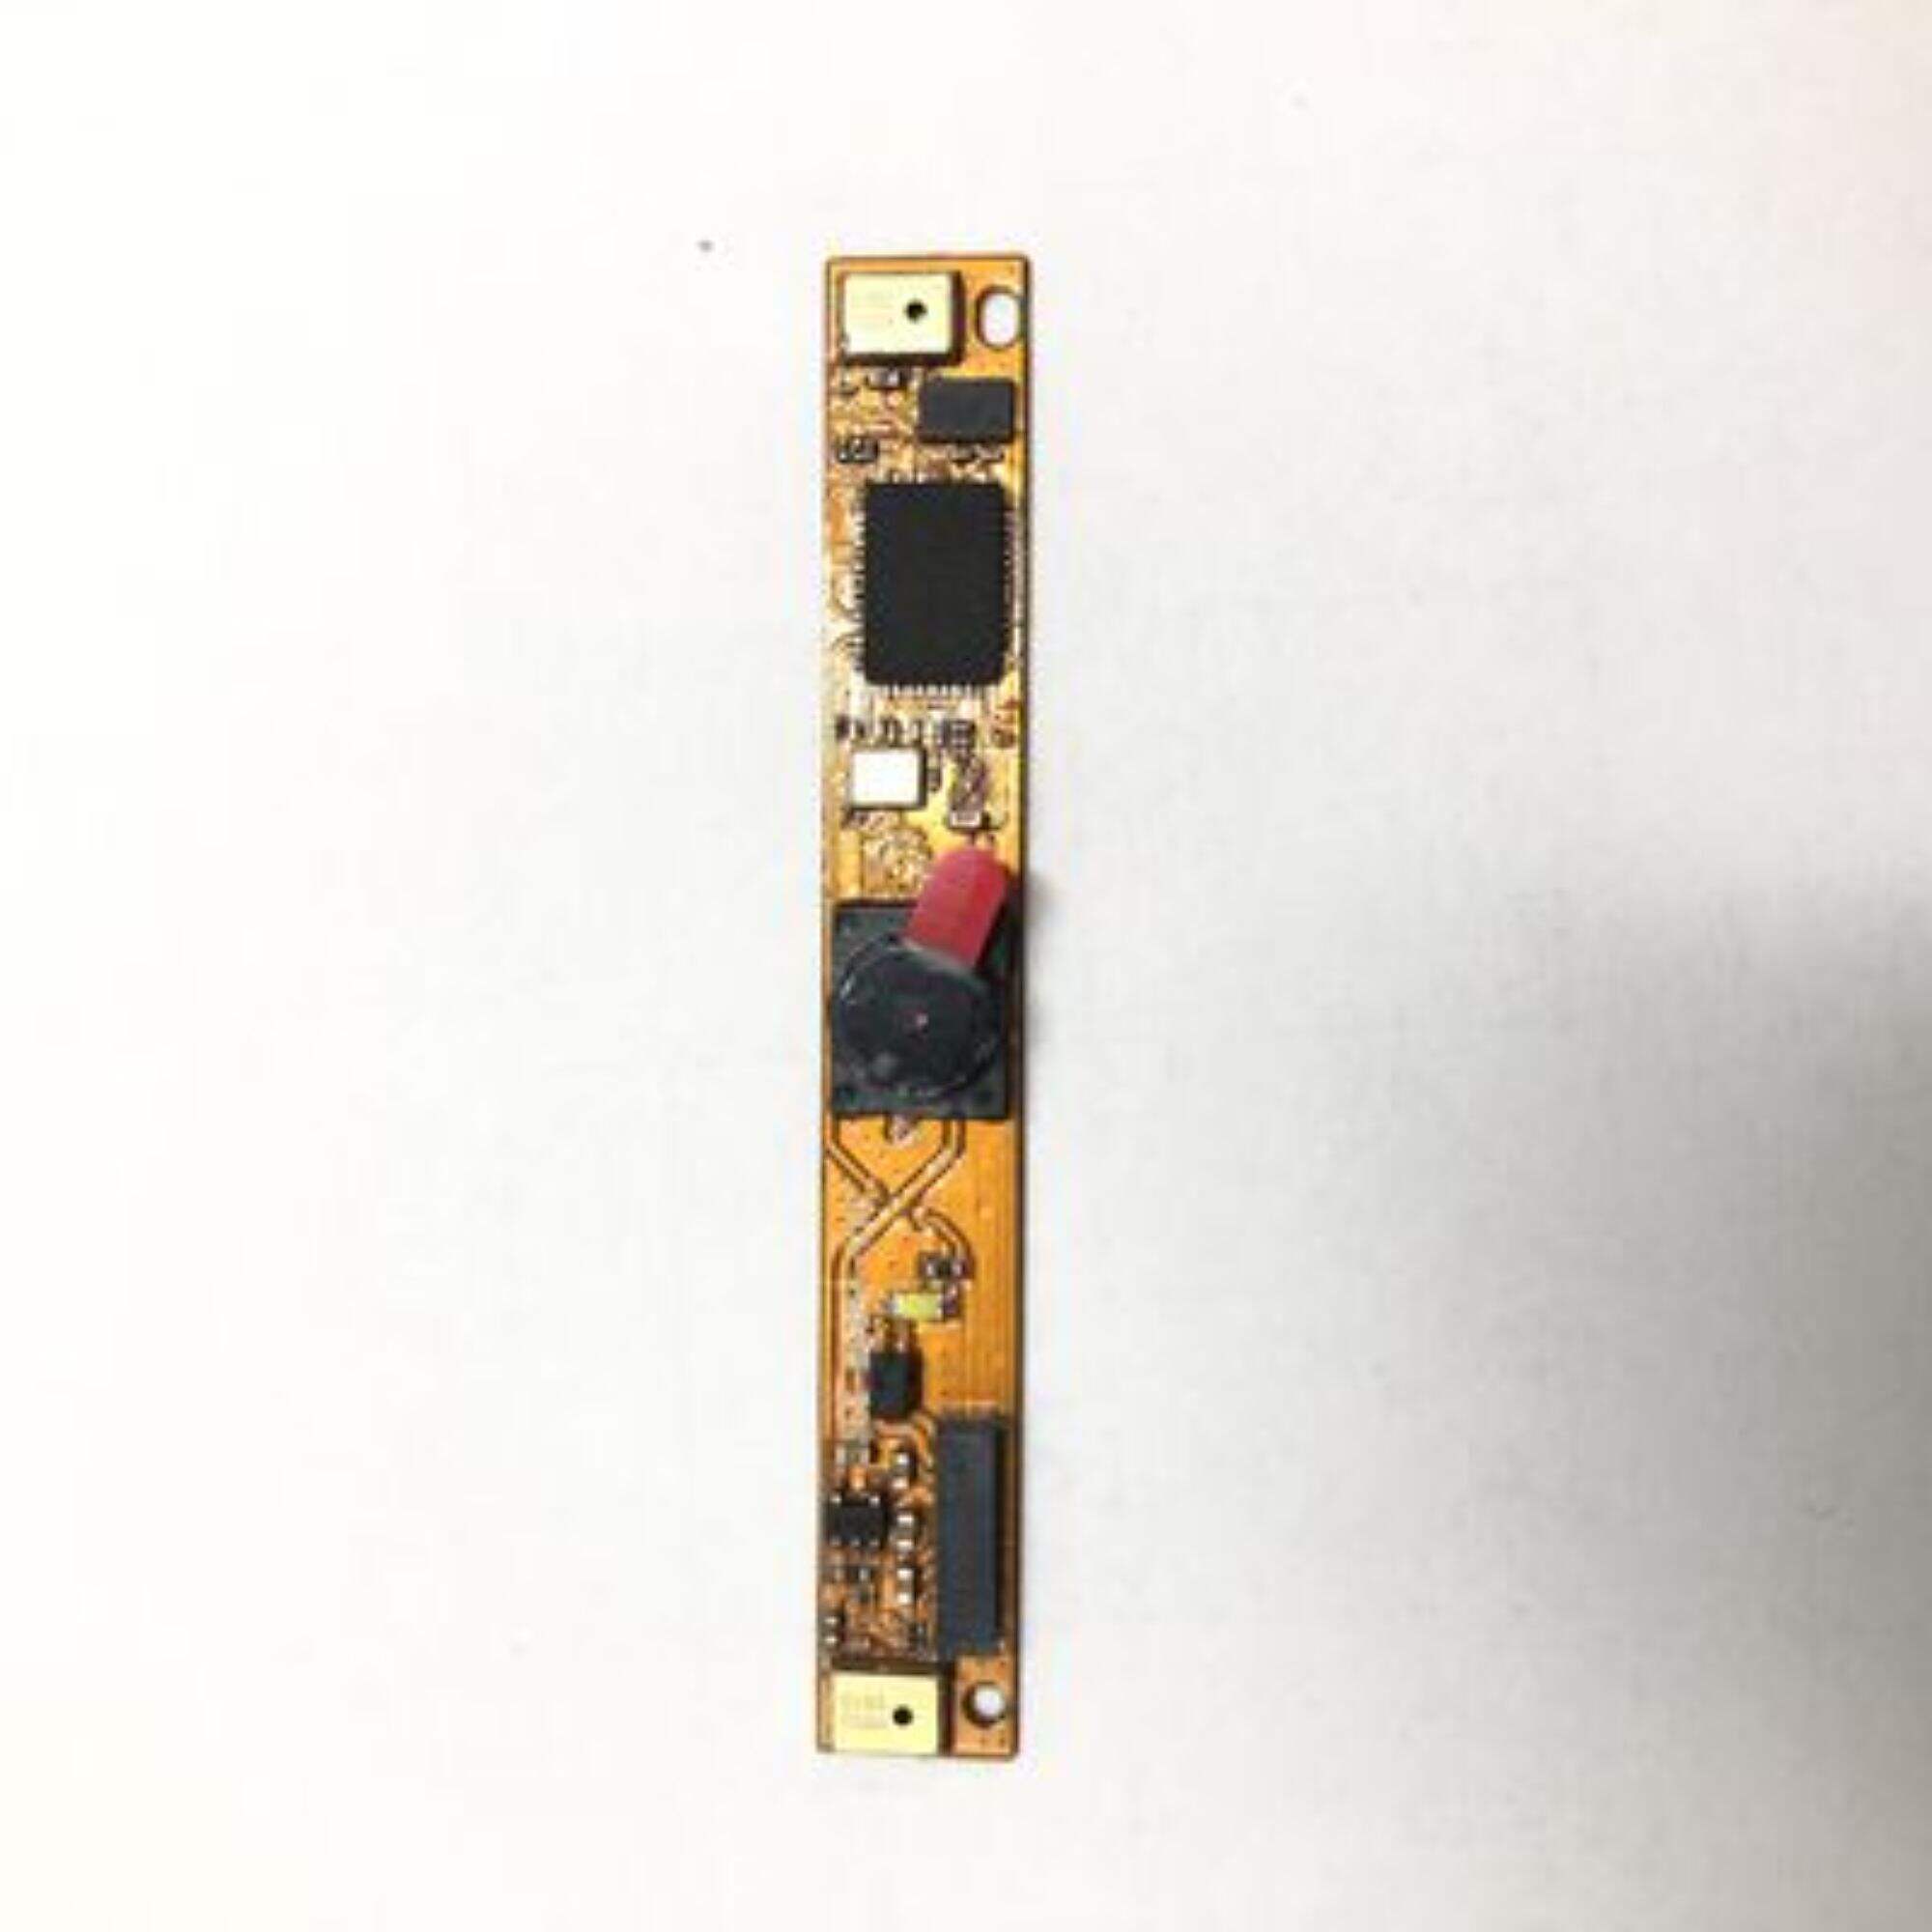 Video Conferencing OEM Laptop Webcam Module For HP640G2 Battery Powered